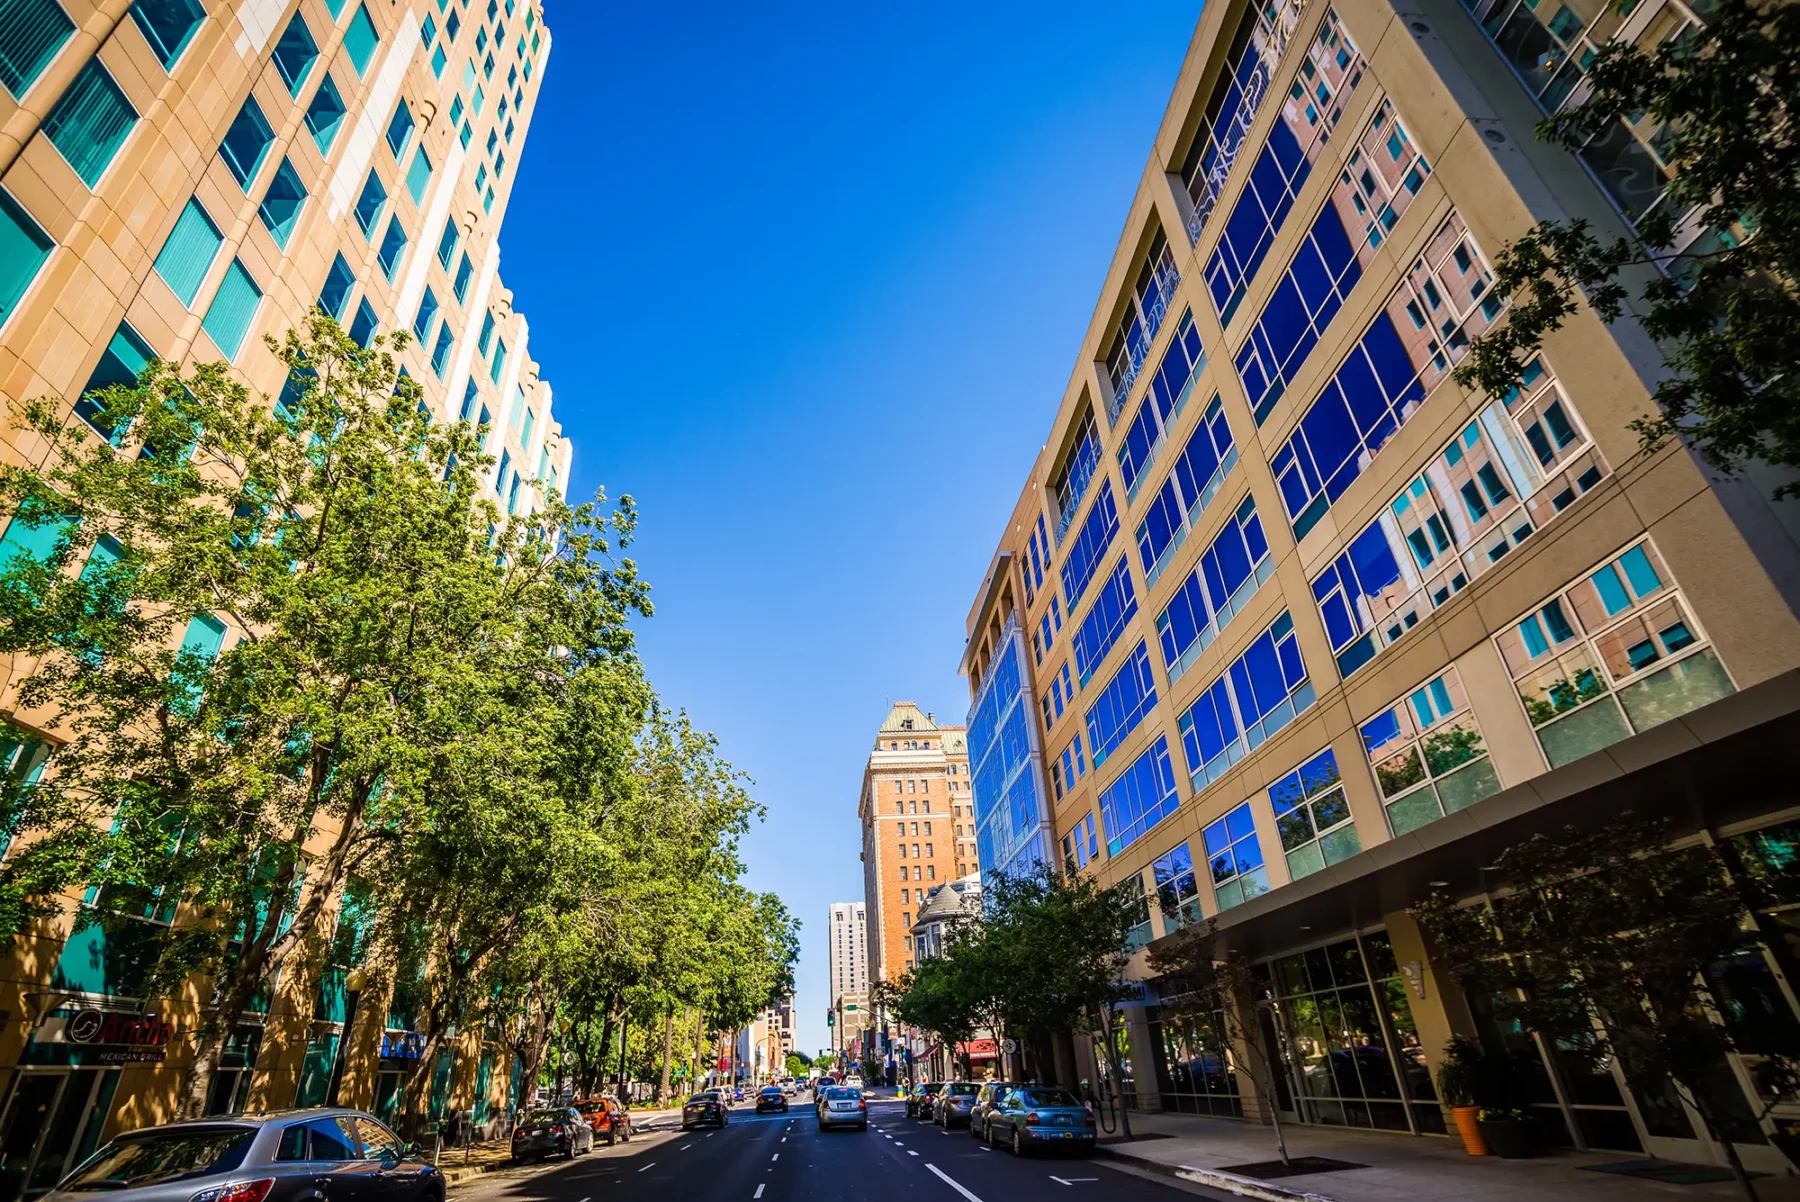 Downtown Sacramento California, large buildings and busy city street